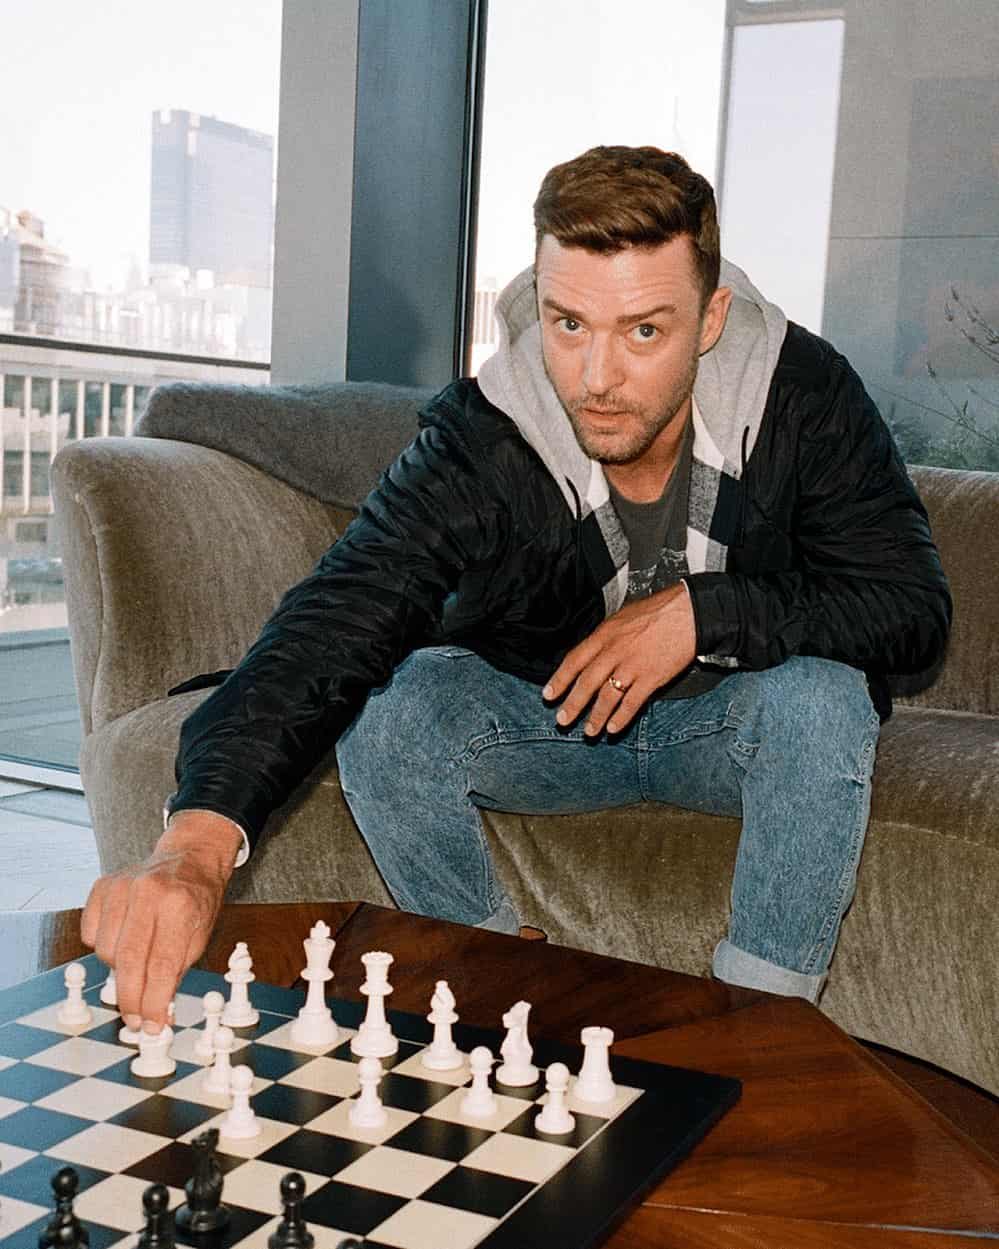 Justin Timberlake - Biography, Profile, Facts and Career